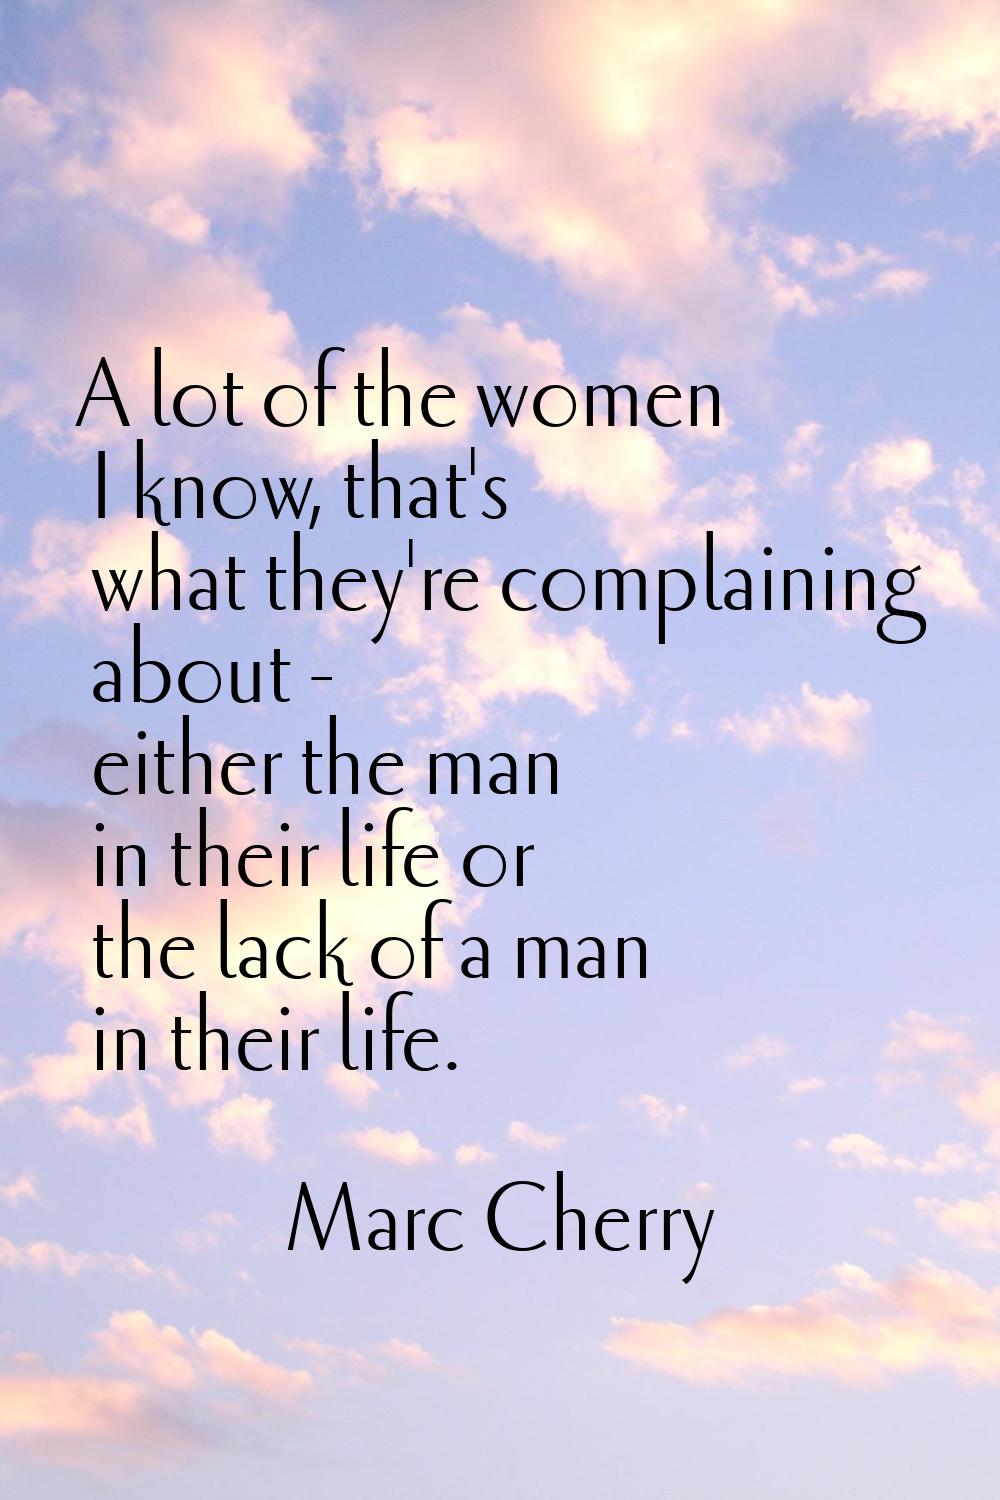 A lot of the women I know, that's what they're complaining about - either the man in their life or 